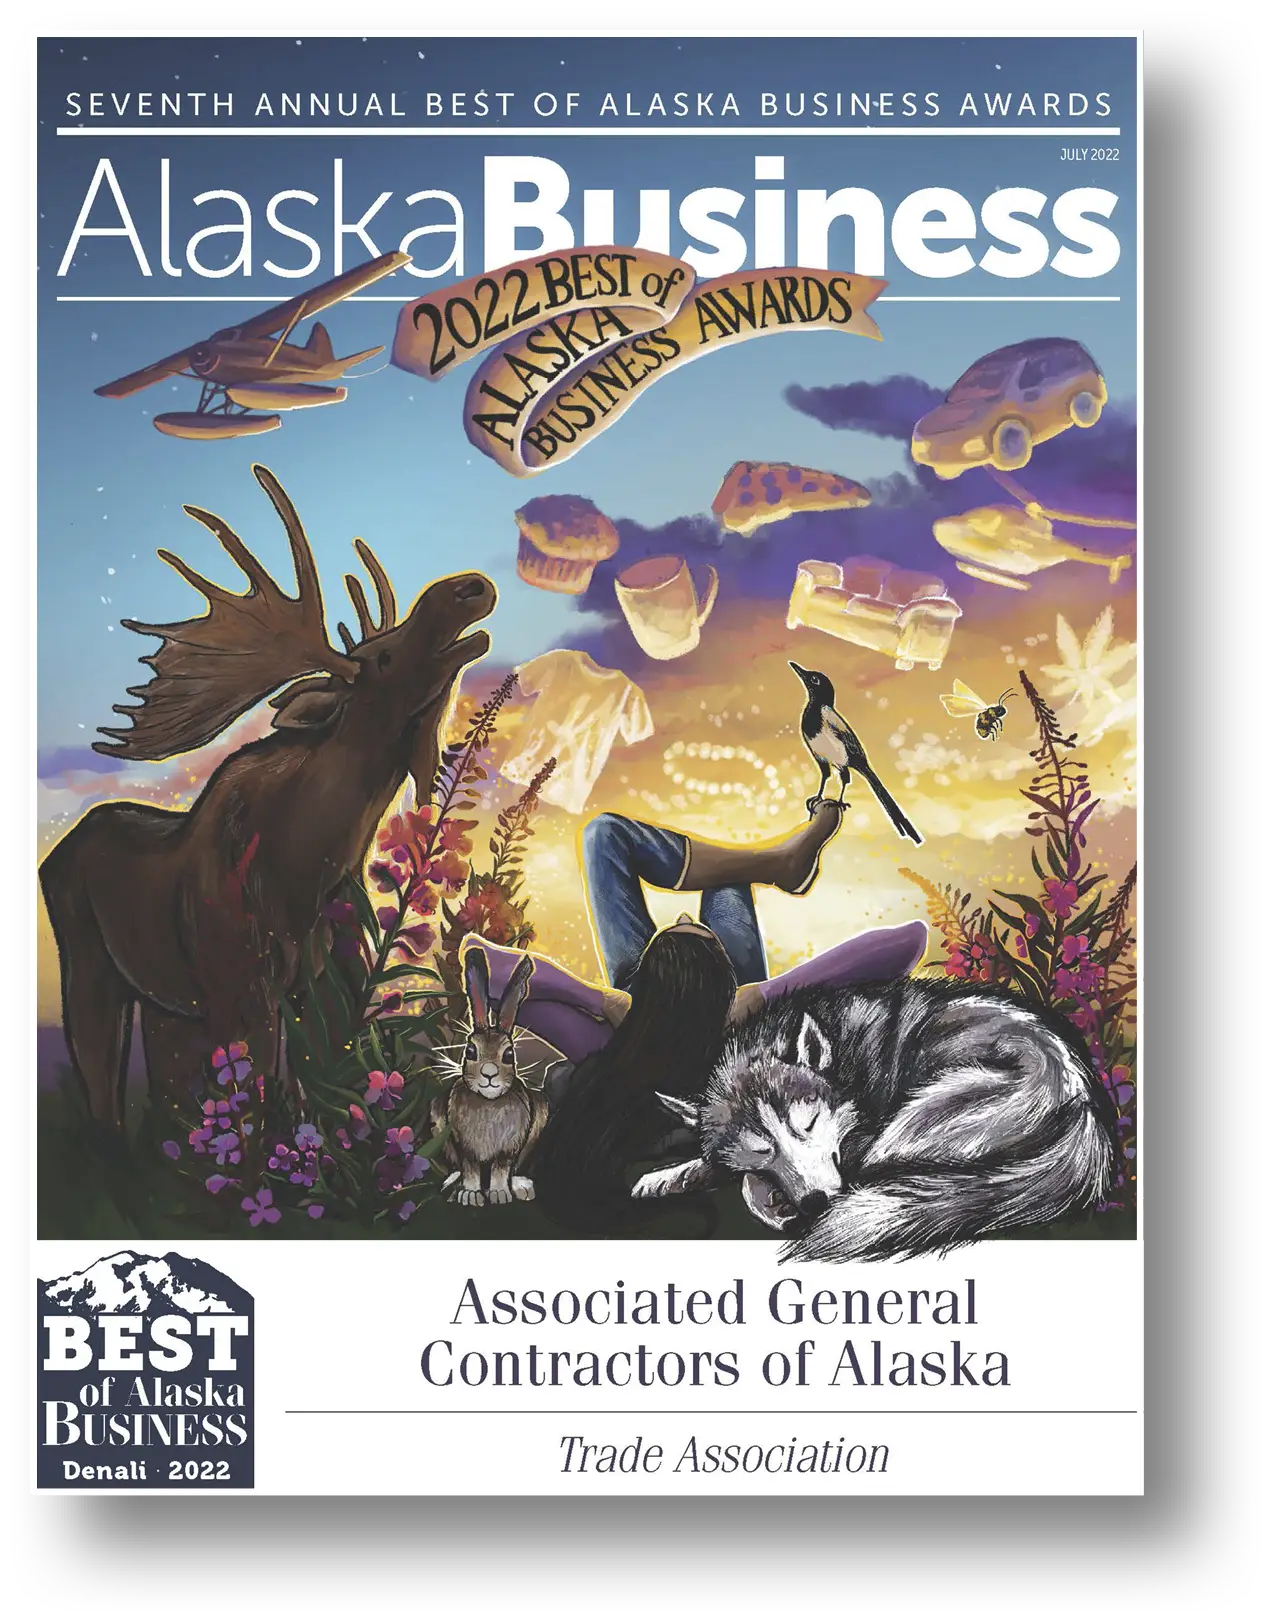 AGC of Alaska was recognized as the Denali winner in the 2022 Best of Alaska Business Awards: Trade Association category